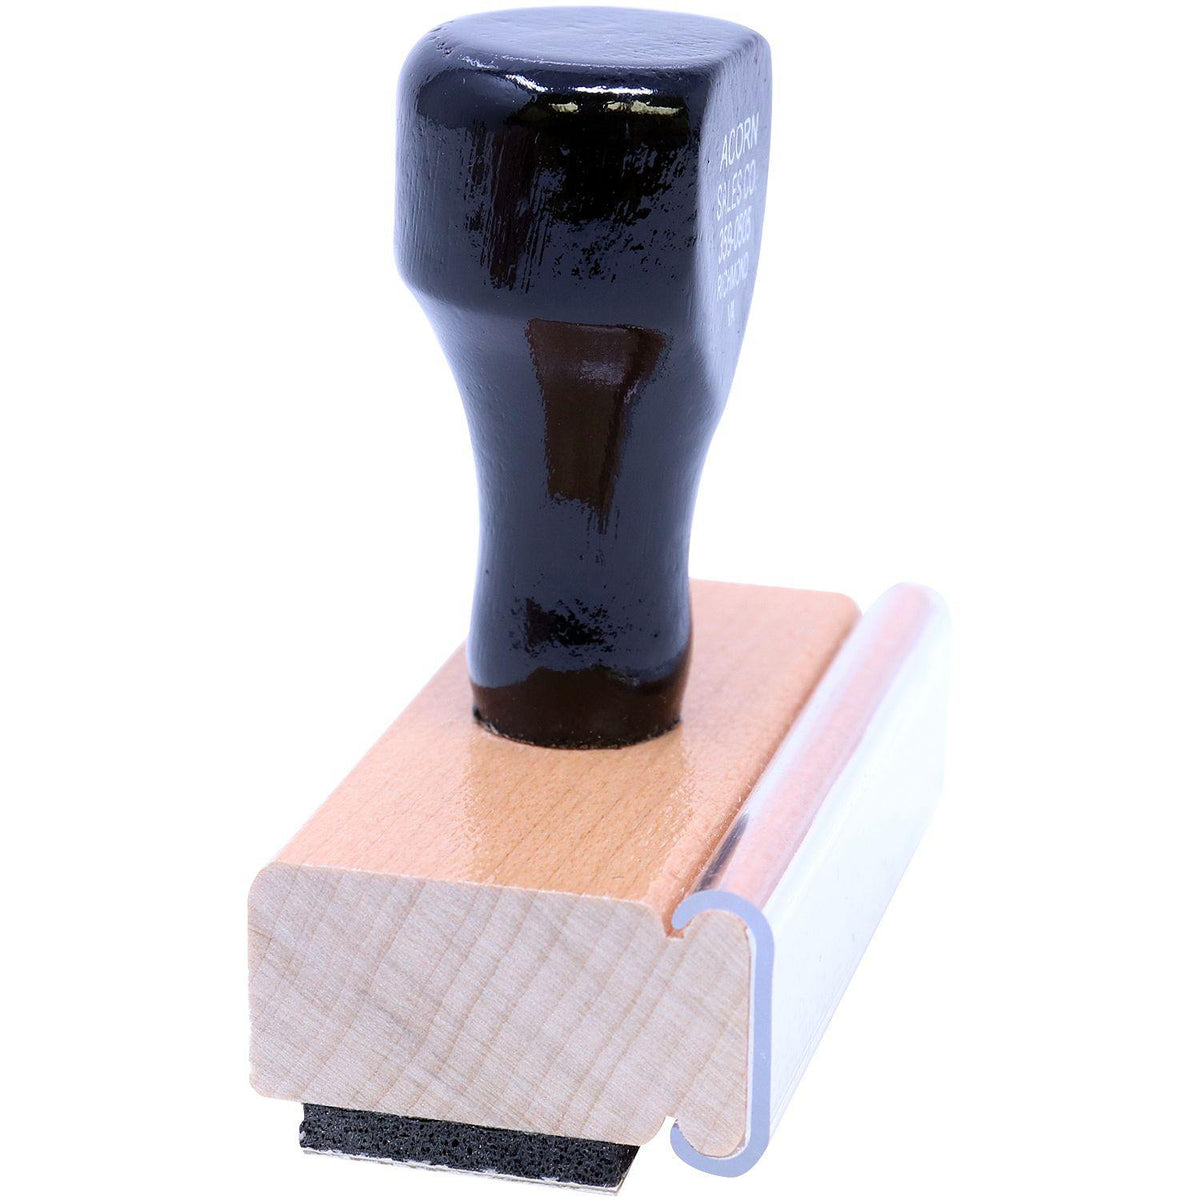 PAL Rubber Stamp - Engineer Seal Stamps - Brand_Acorn, Impression Size_Small, Stamp Type_Regular Stamp, Type of Use_General, Type of Use_Office